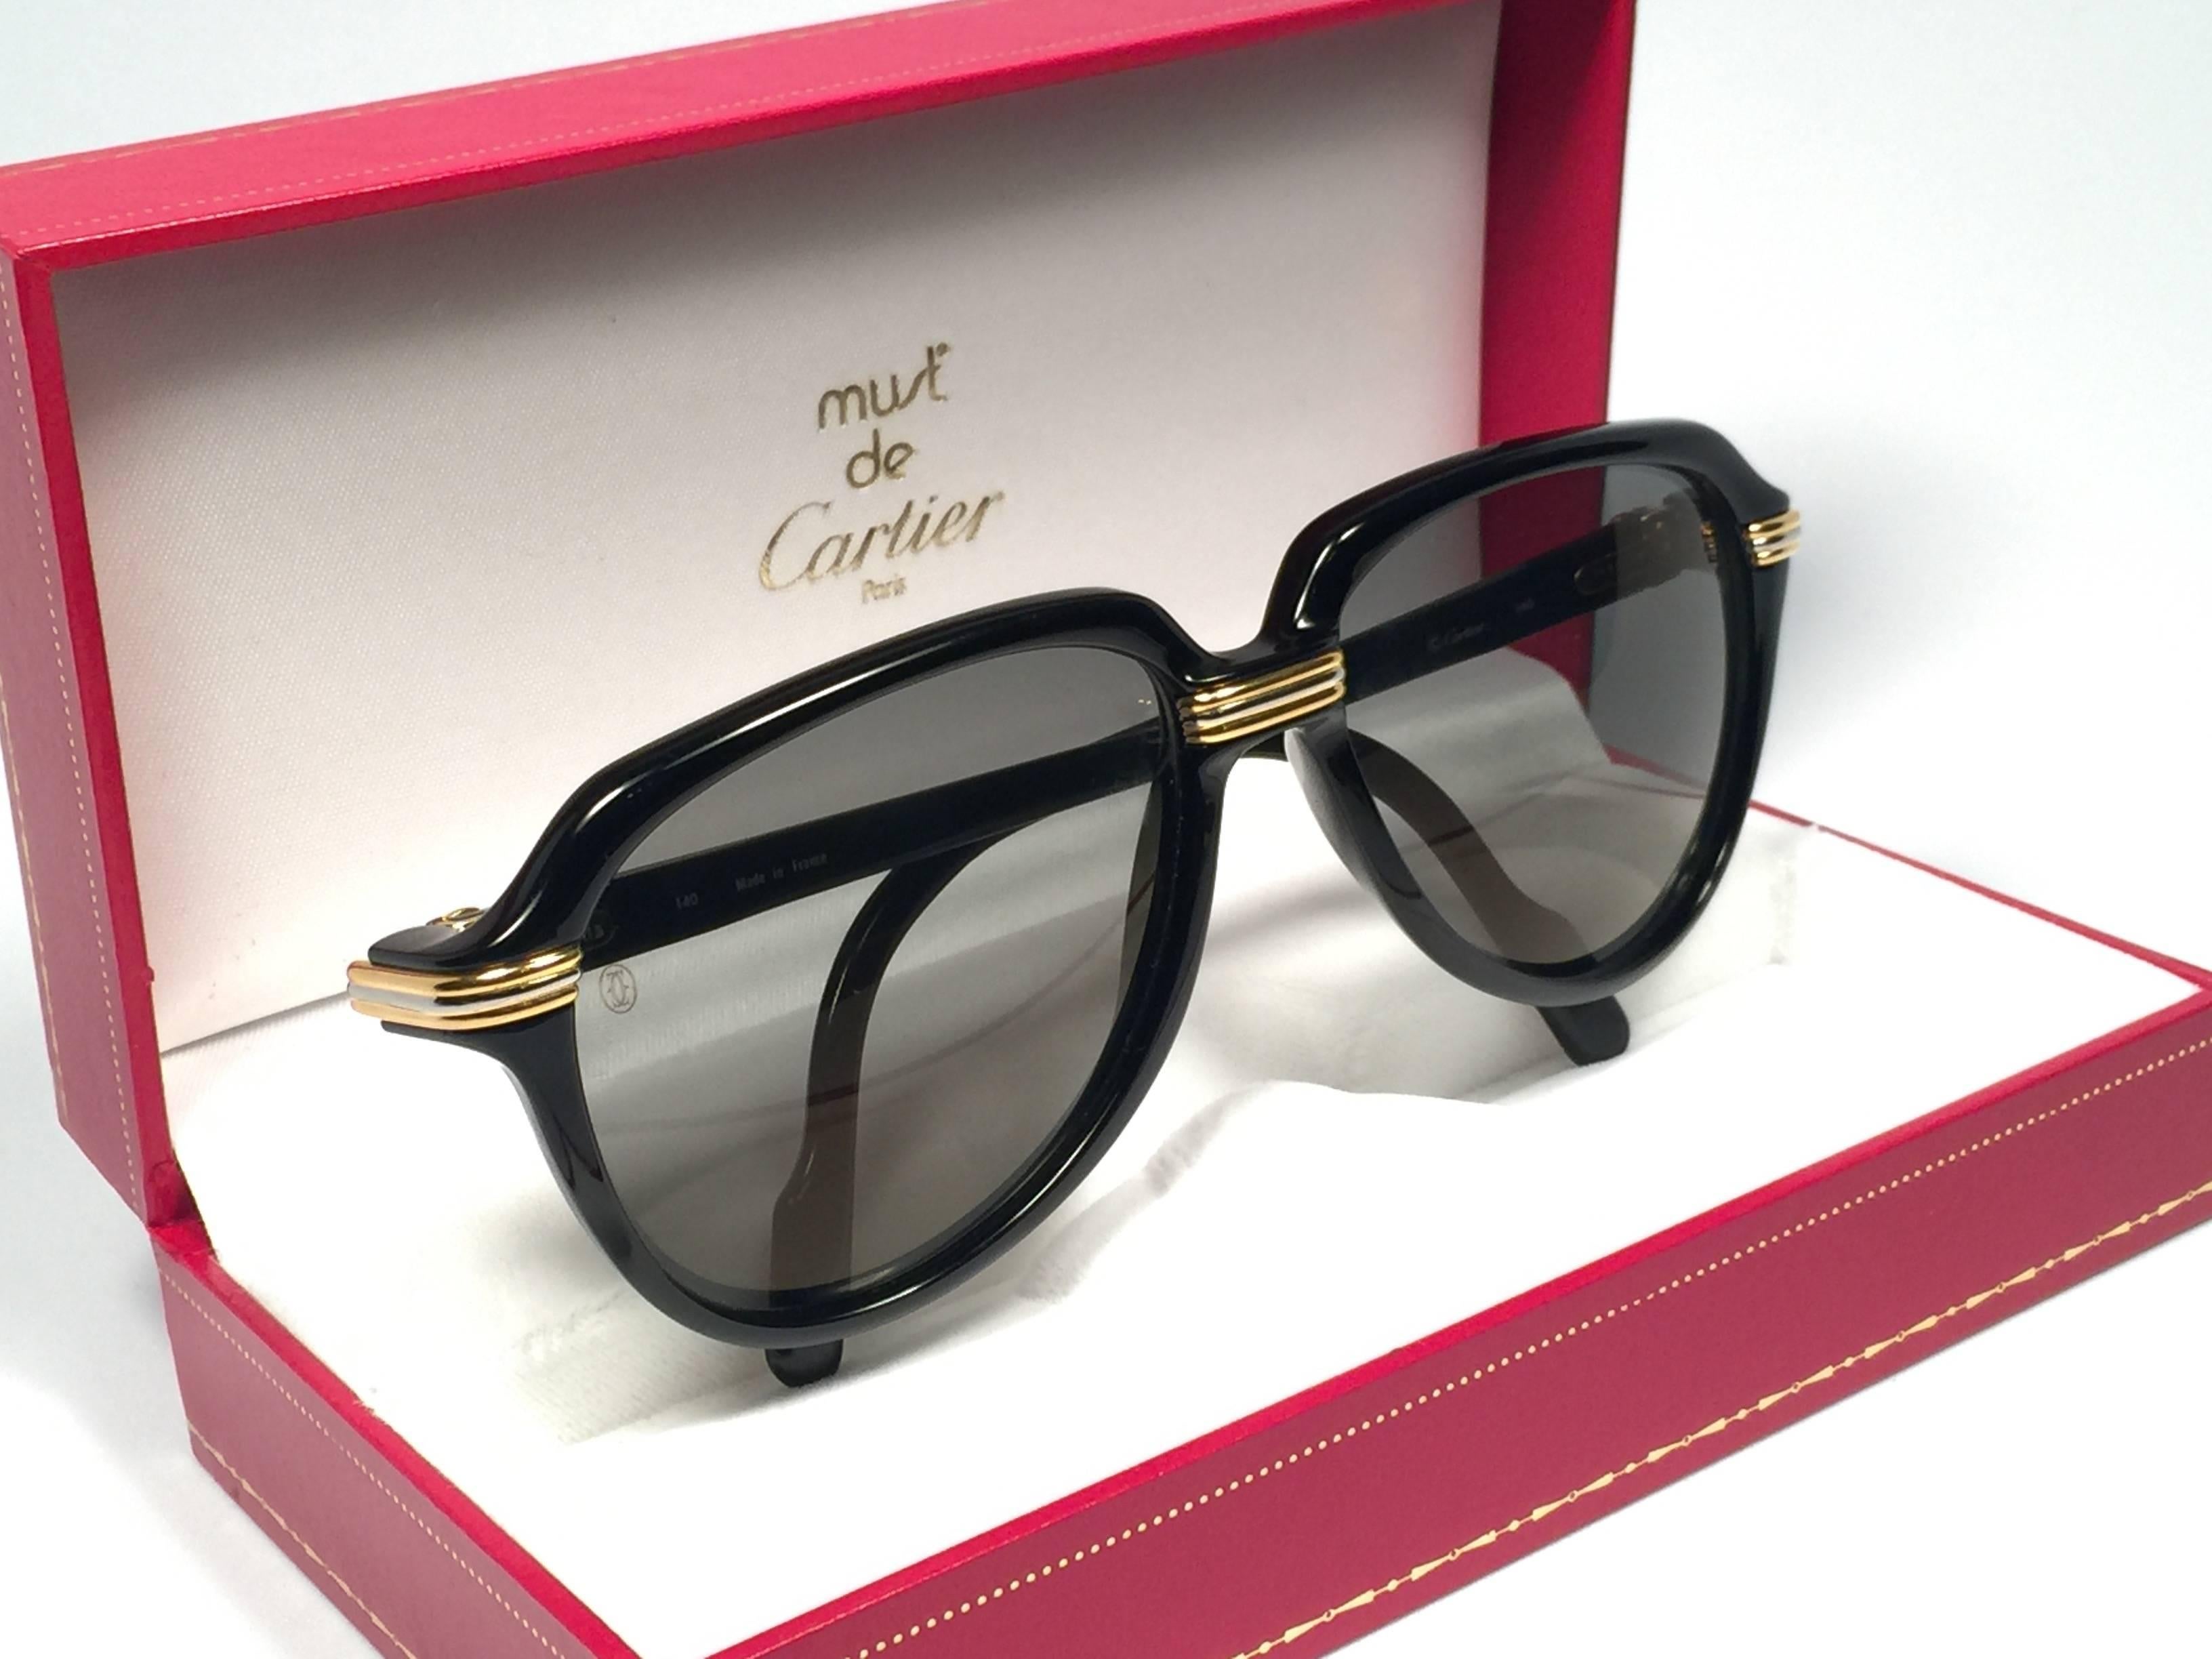 New Collectors Item. Unique and original Cartier Aviator Vitesse sunglasses, the black Edition with yellow and white gold accents.
Frame is with the sides in gold. All hallmarks. Cartier gold signs on the ear paddles. Both arms sport the c from